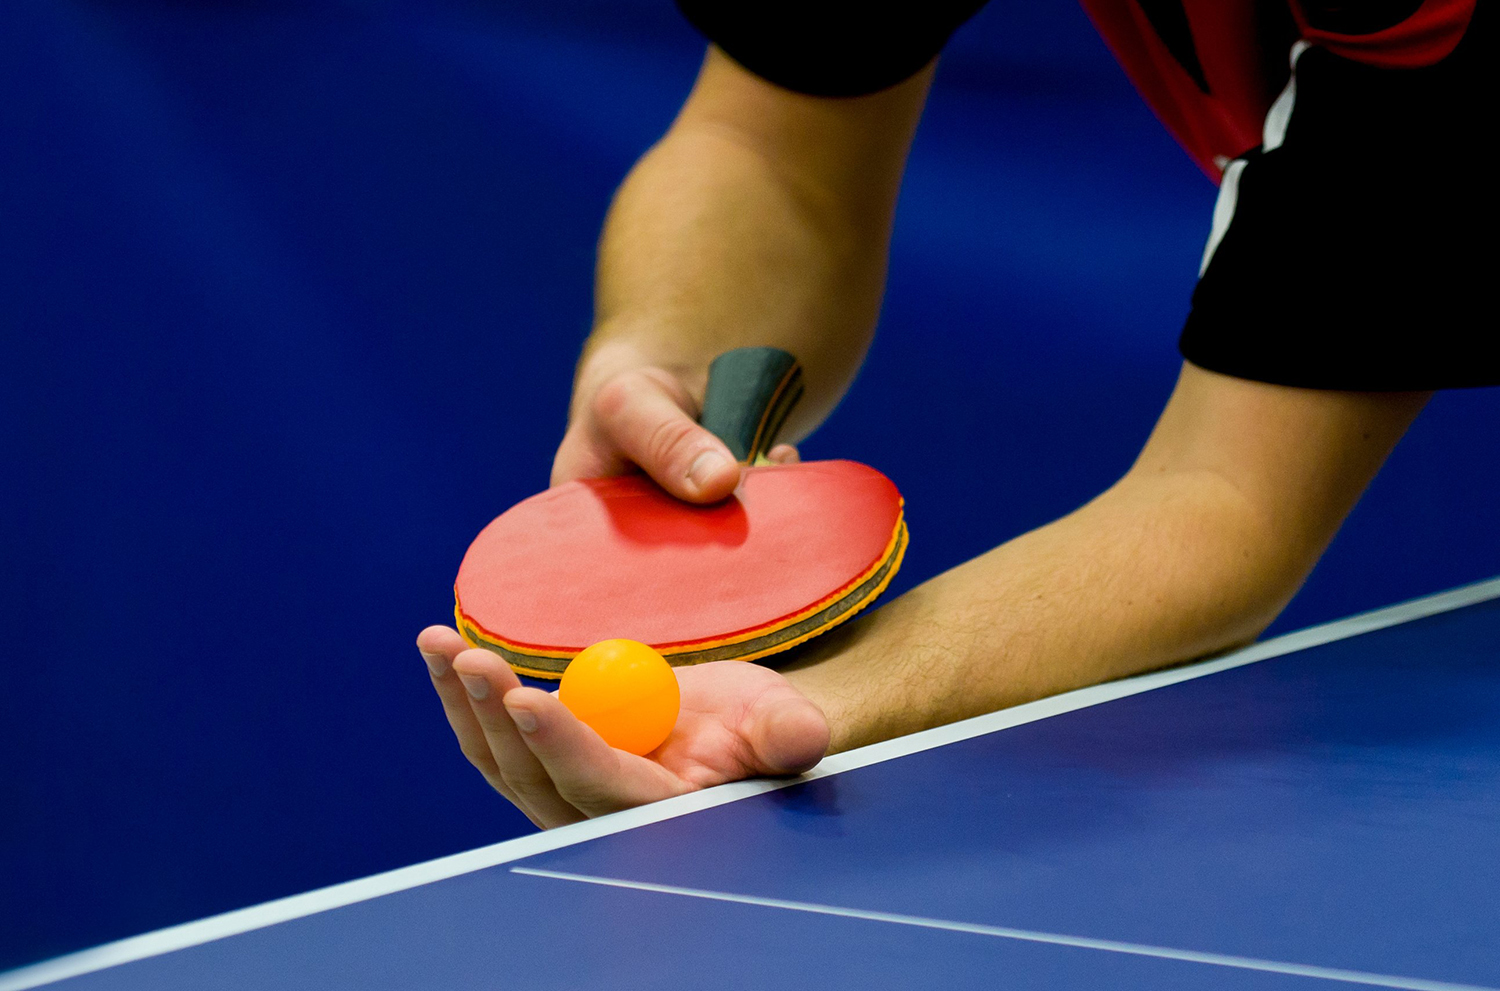 Choose Your Color and Thickness Details about   Juic Patisuma V Table Tennis & Ping Pong Rubber 